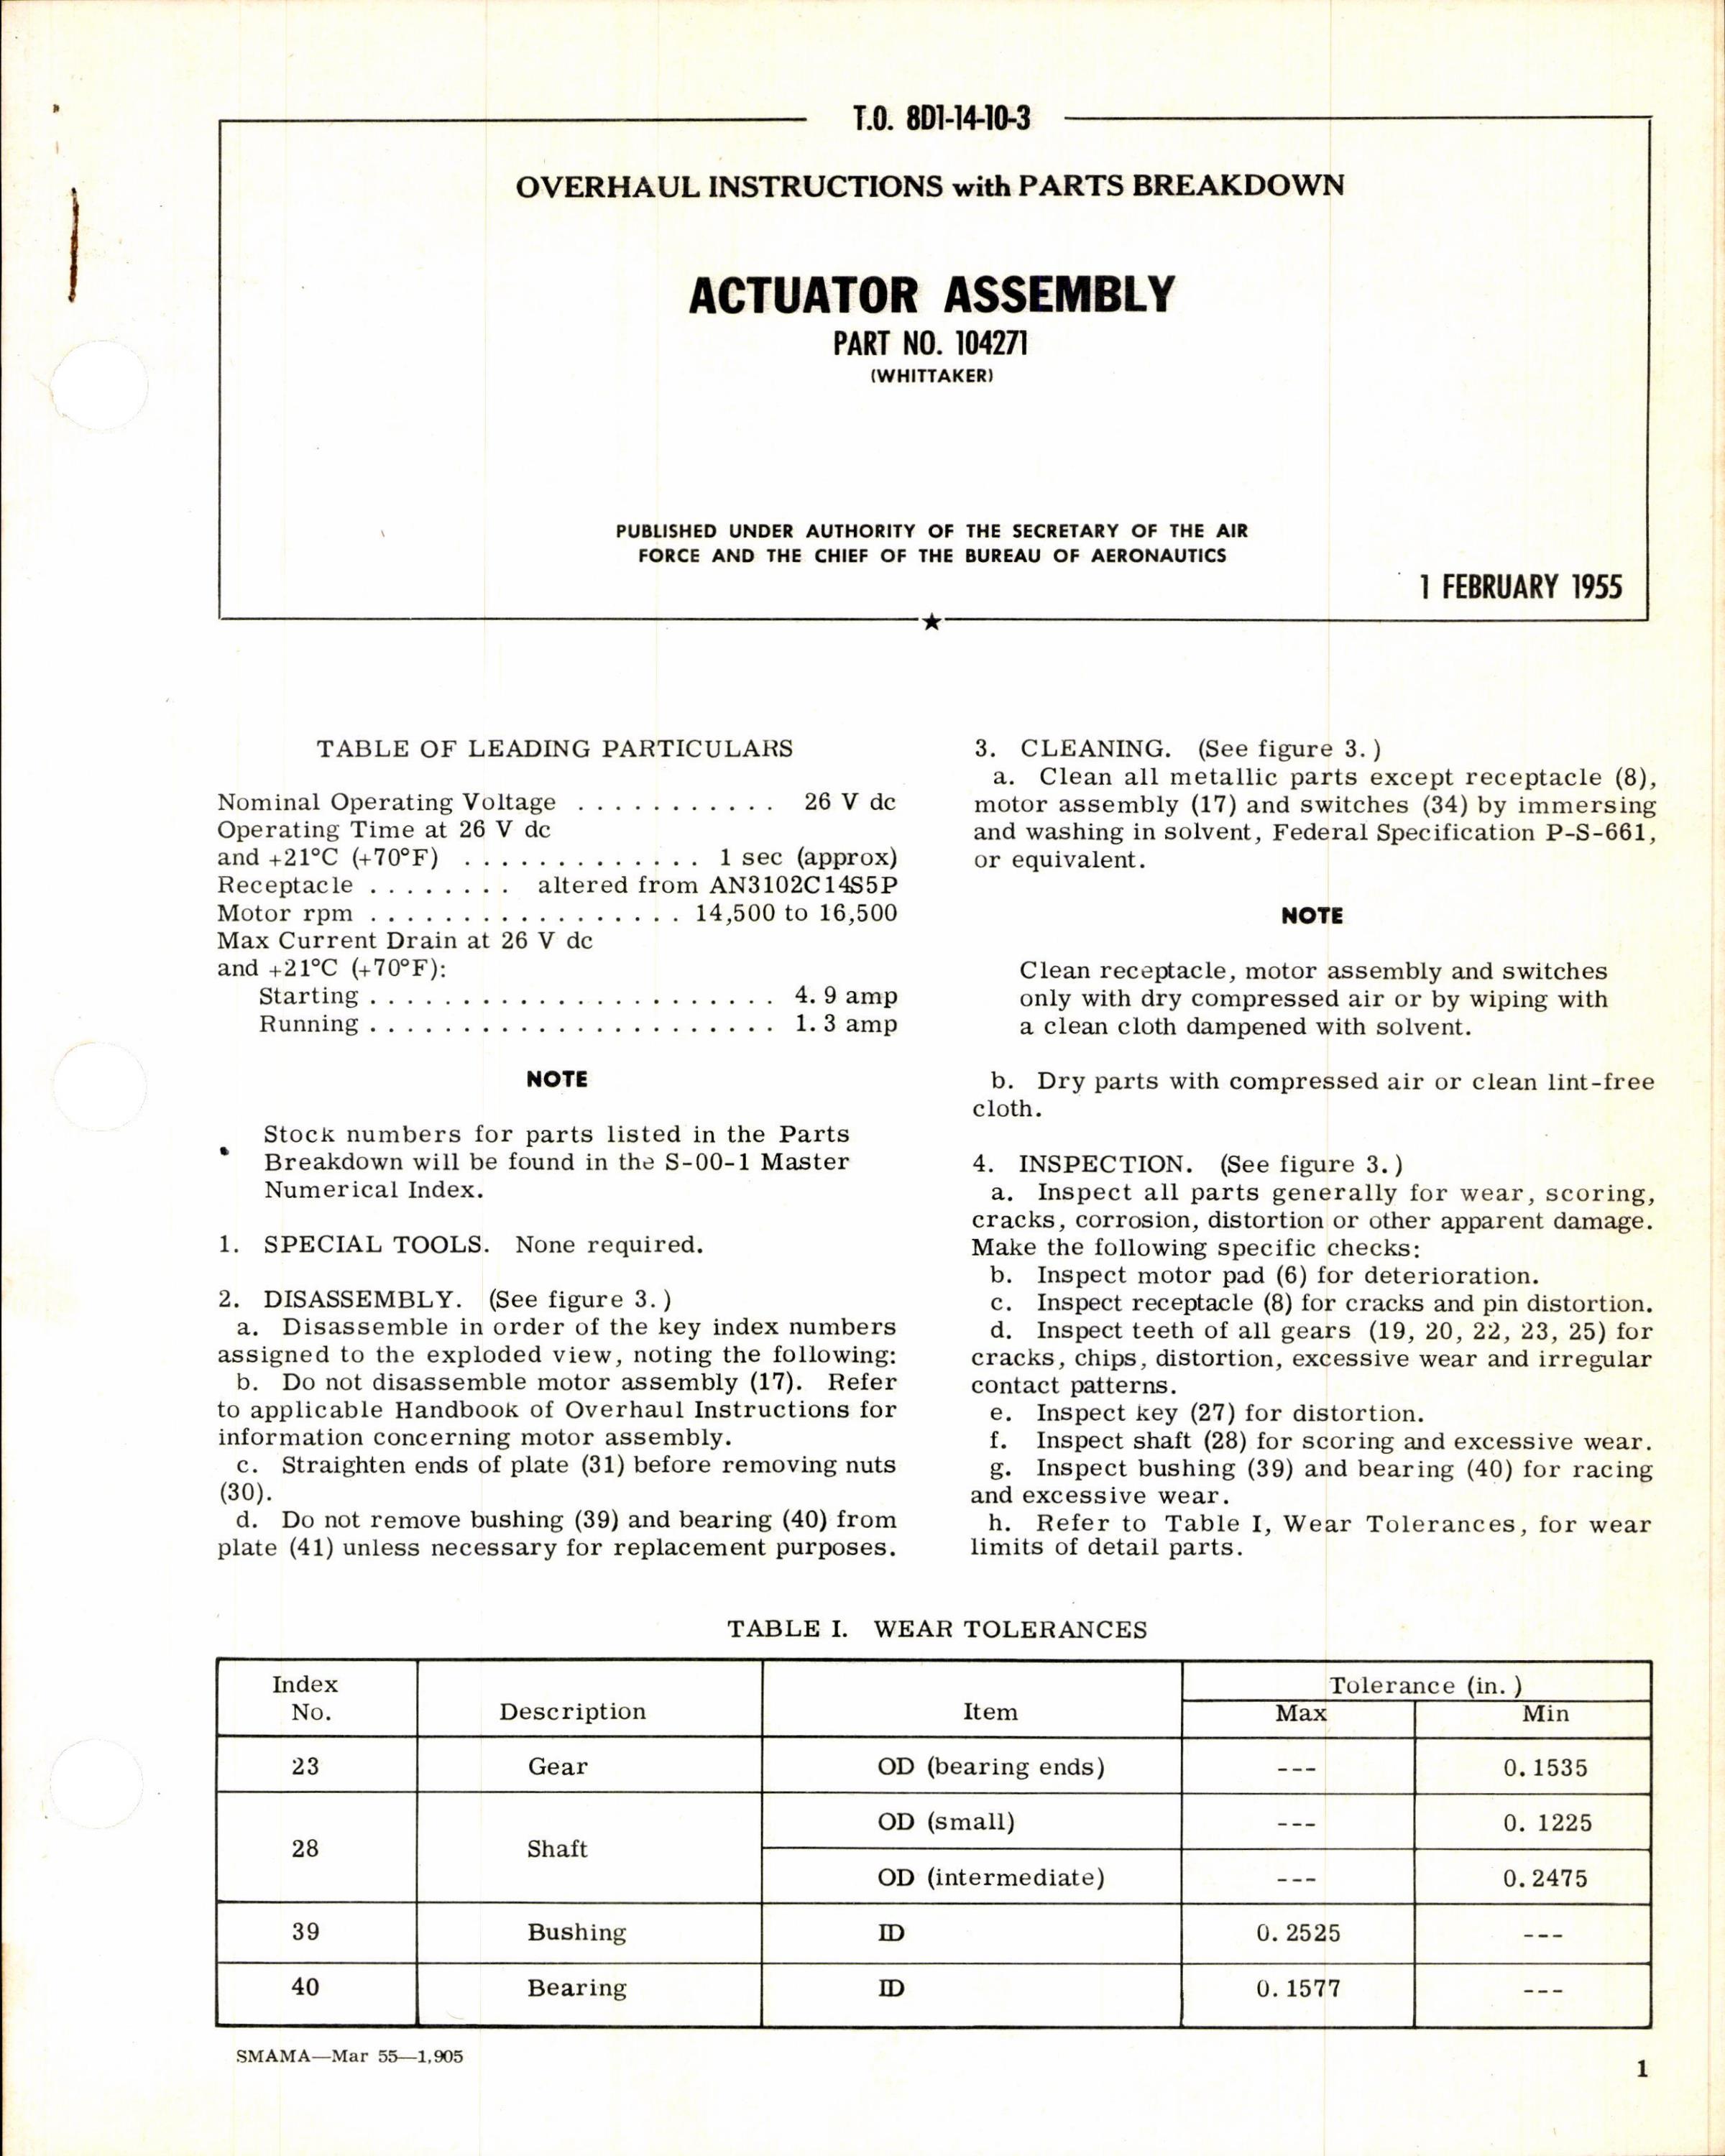 Sample page 1 from AirCorps Library document: Parts Breakdown for Actuator Assembly Part No 104271